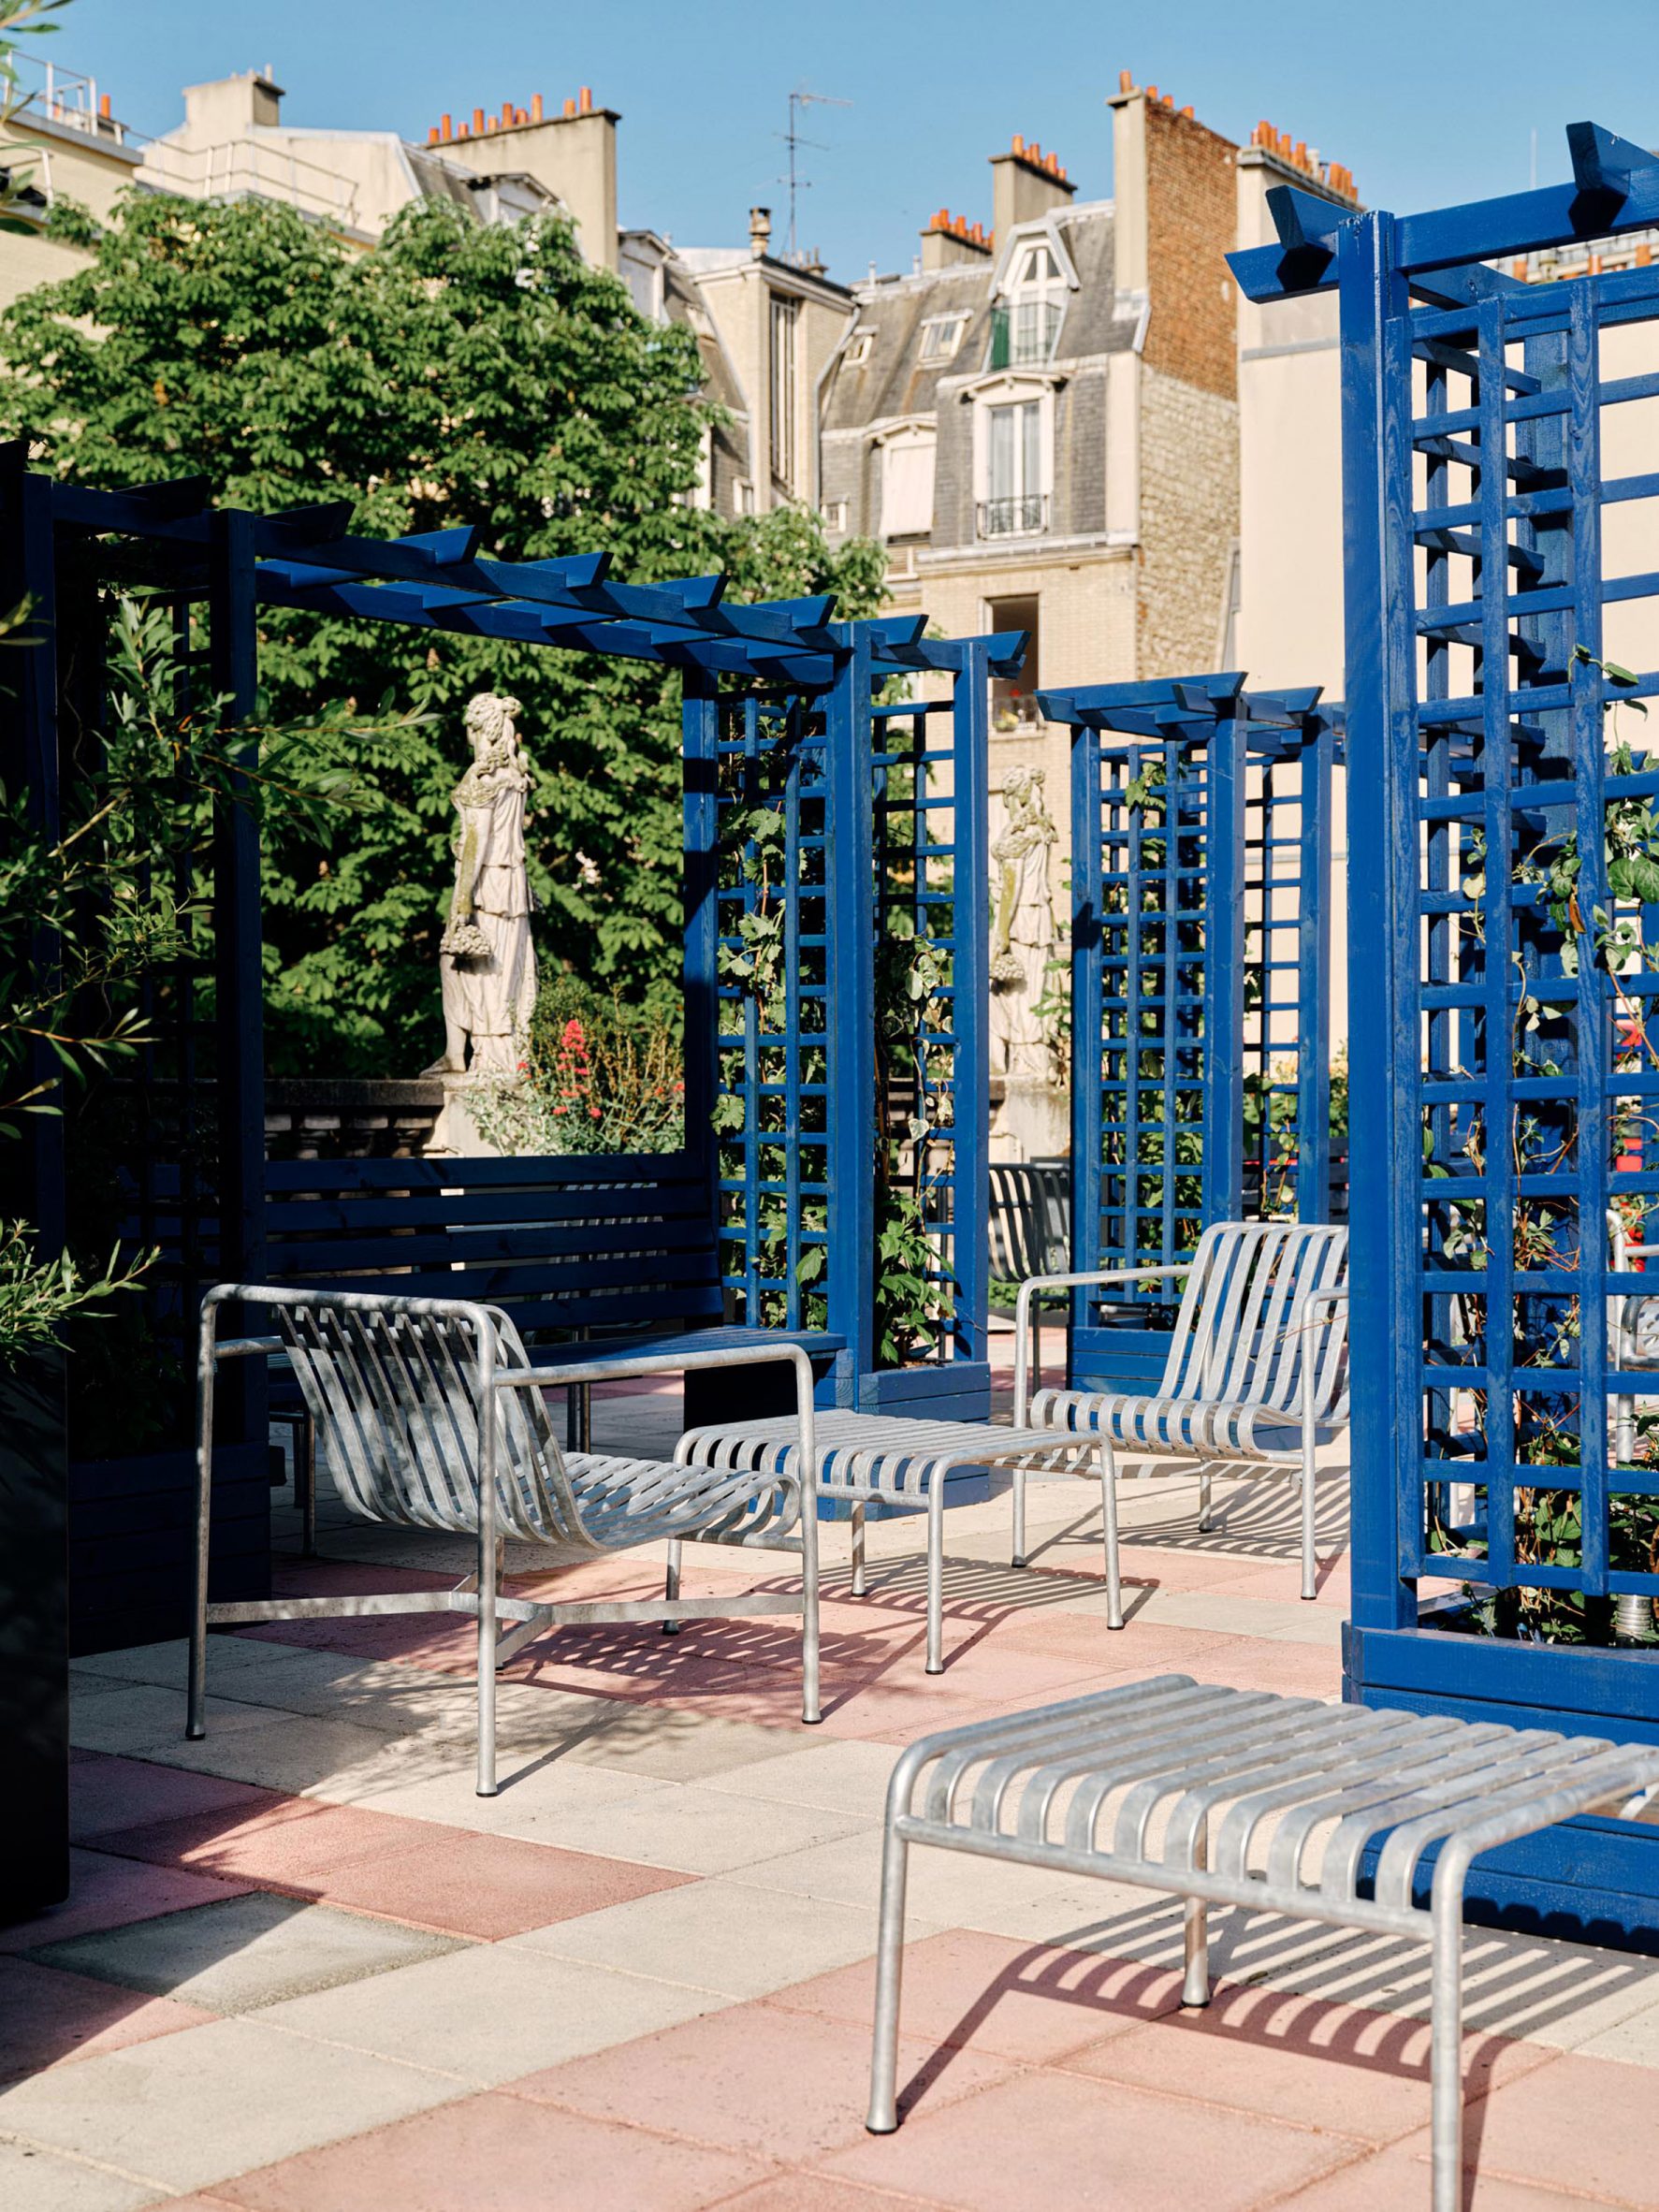 Secret garden area in Parisian courtyard hotel with metal furniture and trees